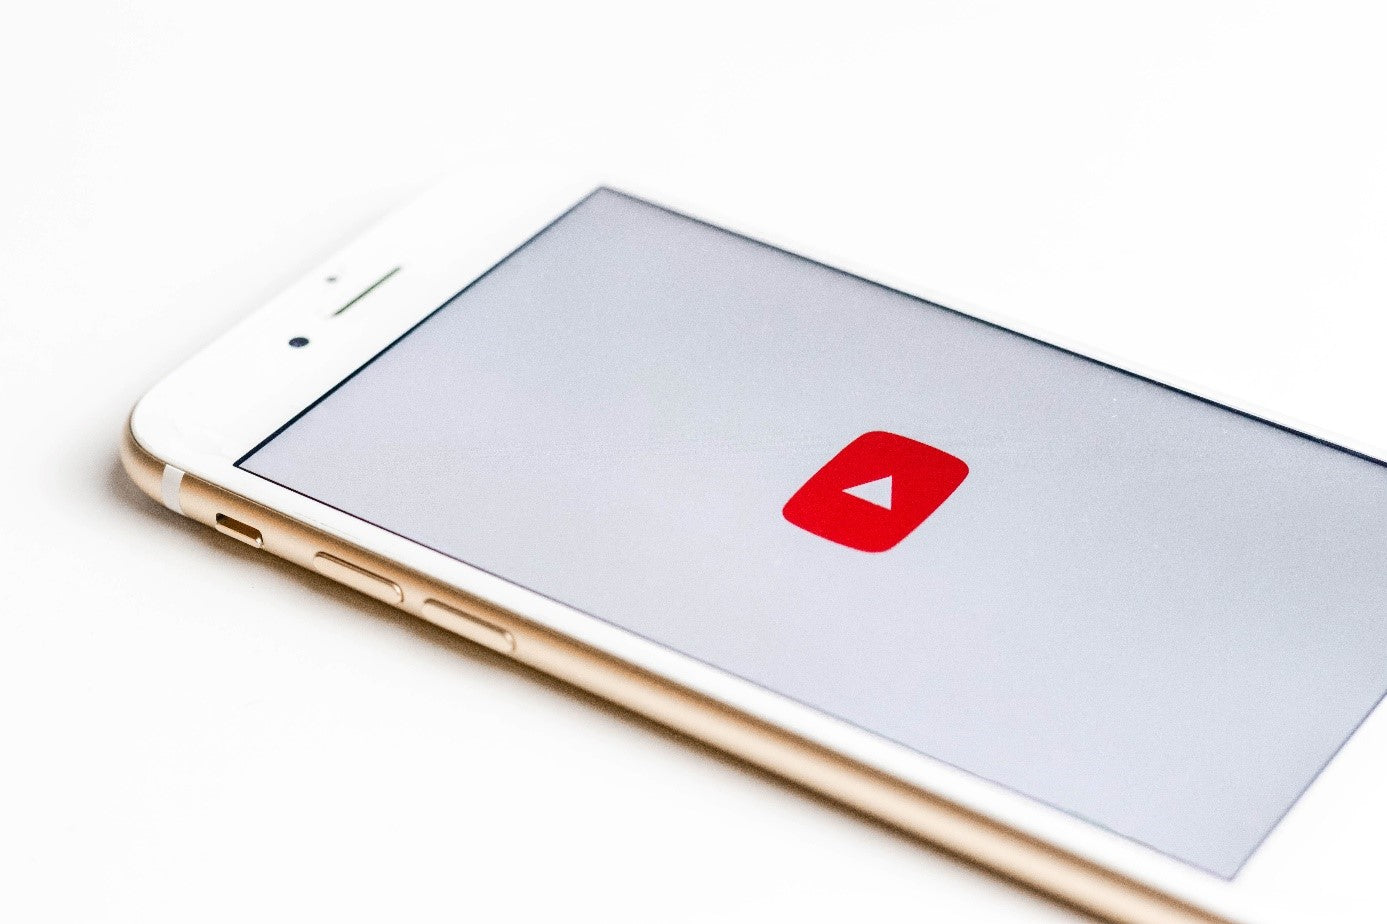 The Complete Guide: Create a YouTube Video with a Smartphone